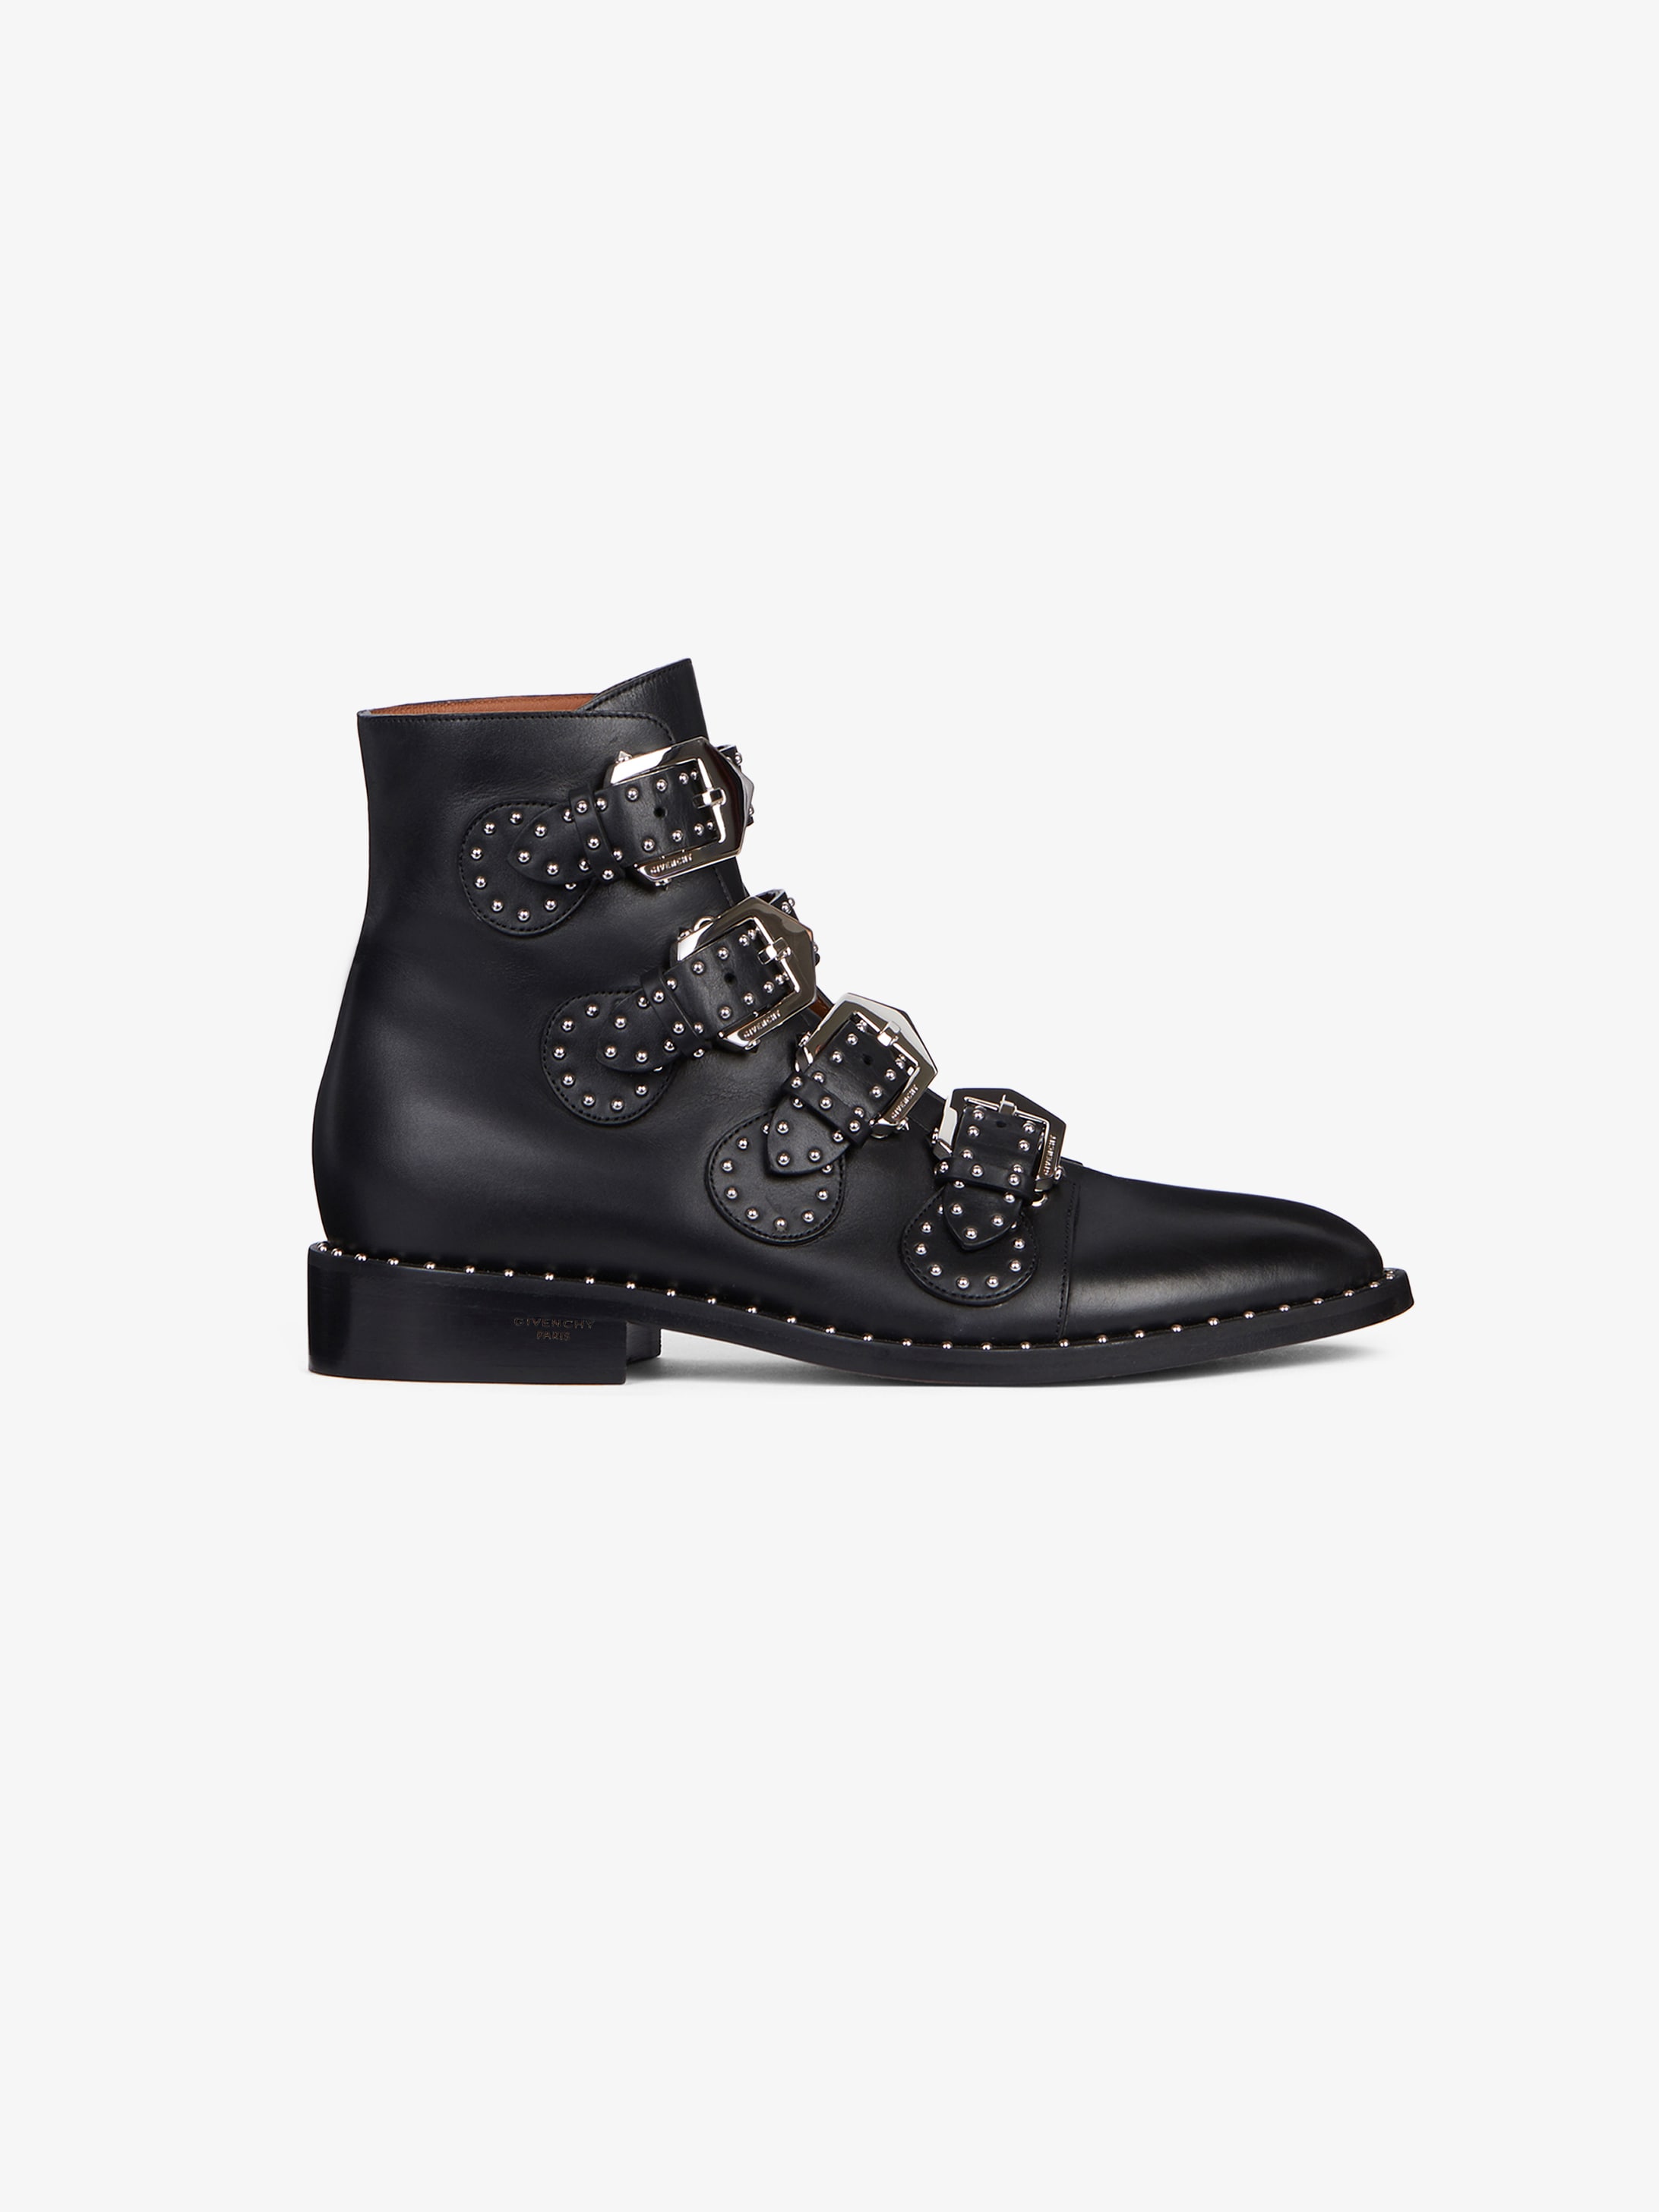 Givenchy Elegant Studs ankle boots | GIVENCHY Paris